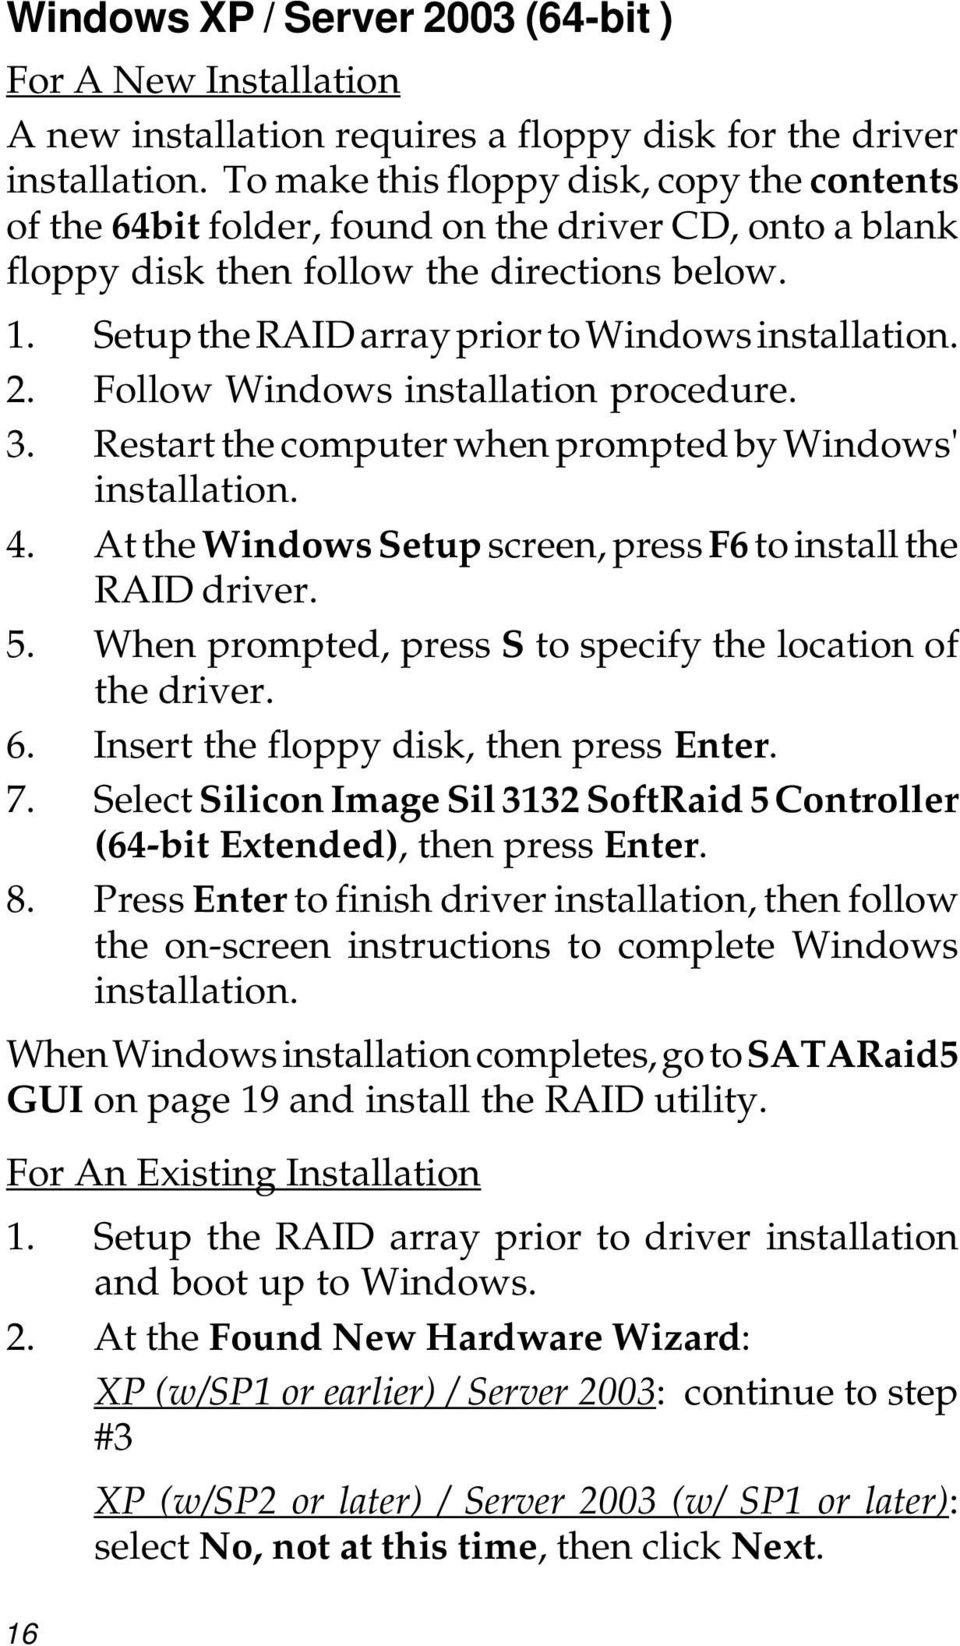 Setup the RAID array prior to Windows installation. 2. Follow Windows installation procedure. 3. Restart the computer when prompted by Windows' installation. 4.